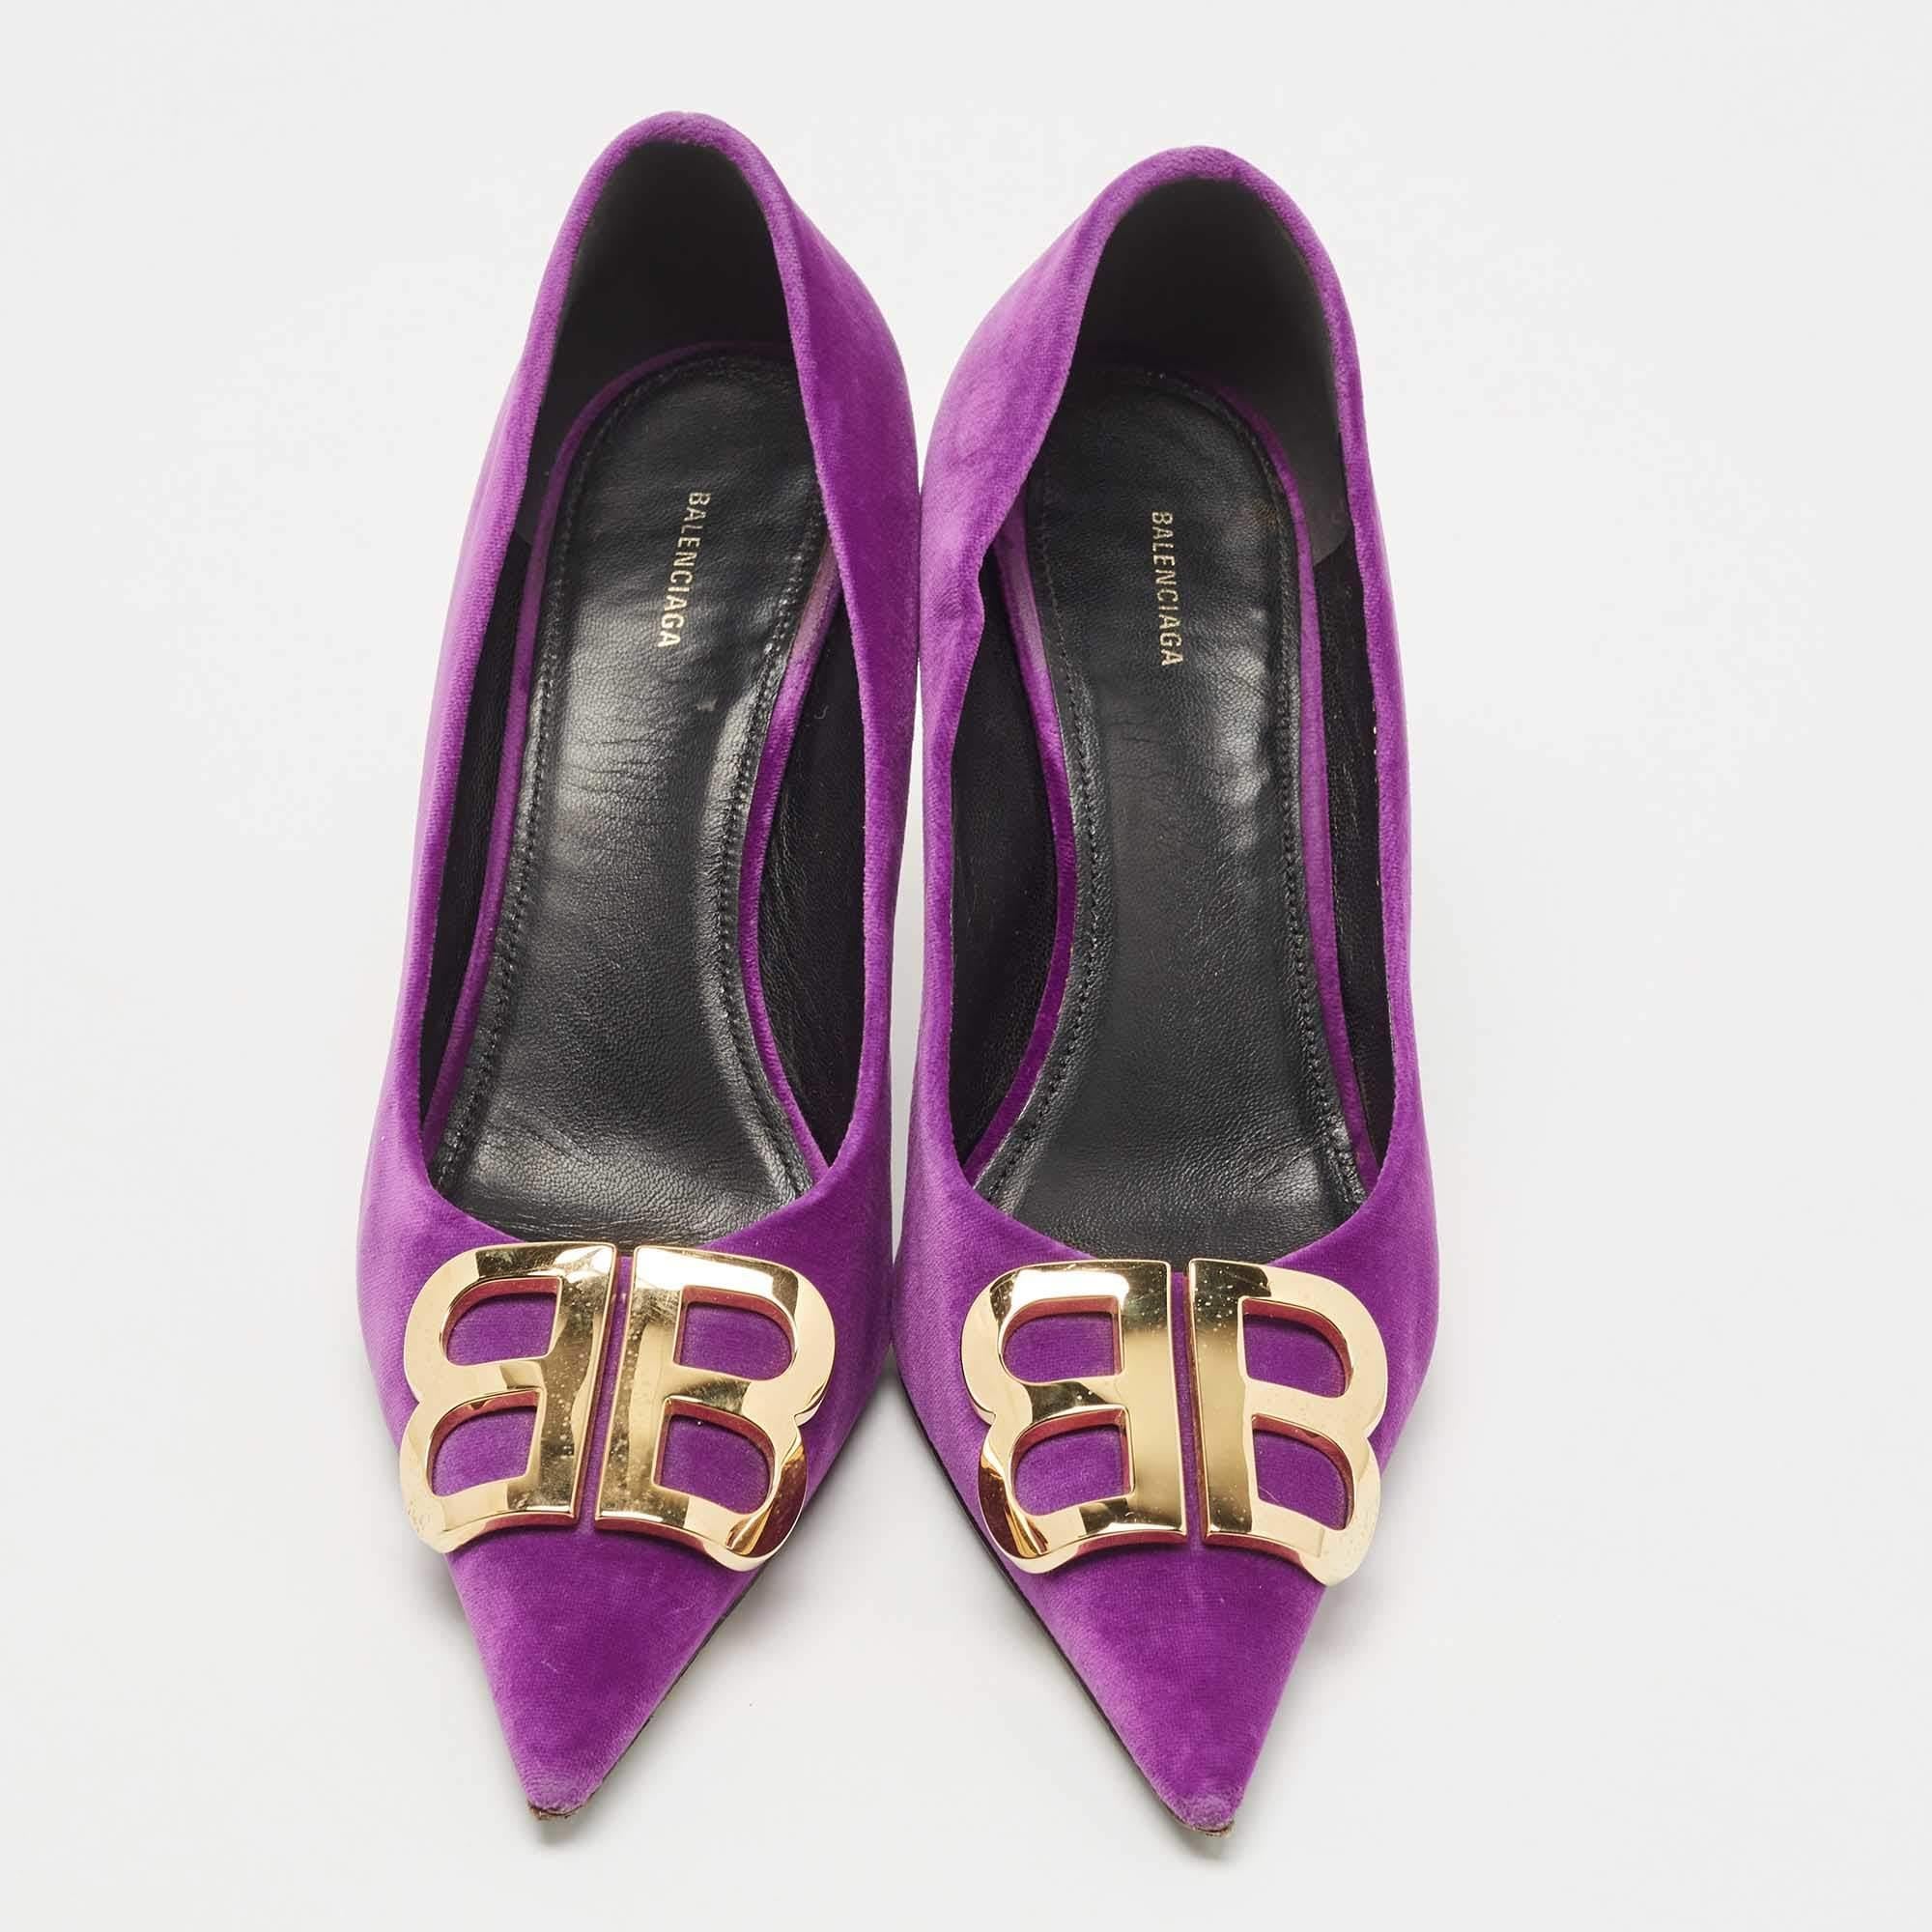 Sleek and sharp, this pair of Balenciaga pumps will complement a variety of outfits in your wardrobe. The velvet creation features a purple hue and logo motif on the upper Elevated on 9cm heels, it will take your fashion statement a notch higher.

